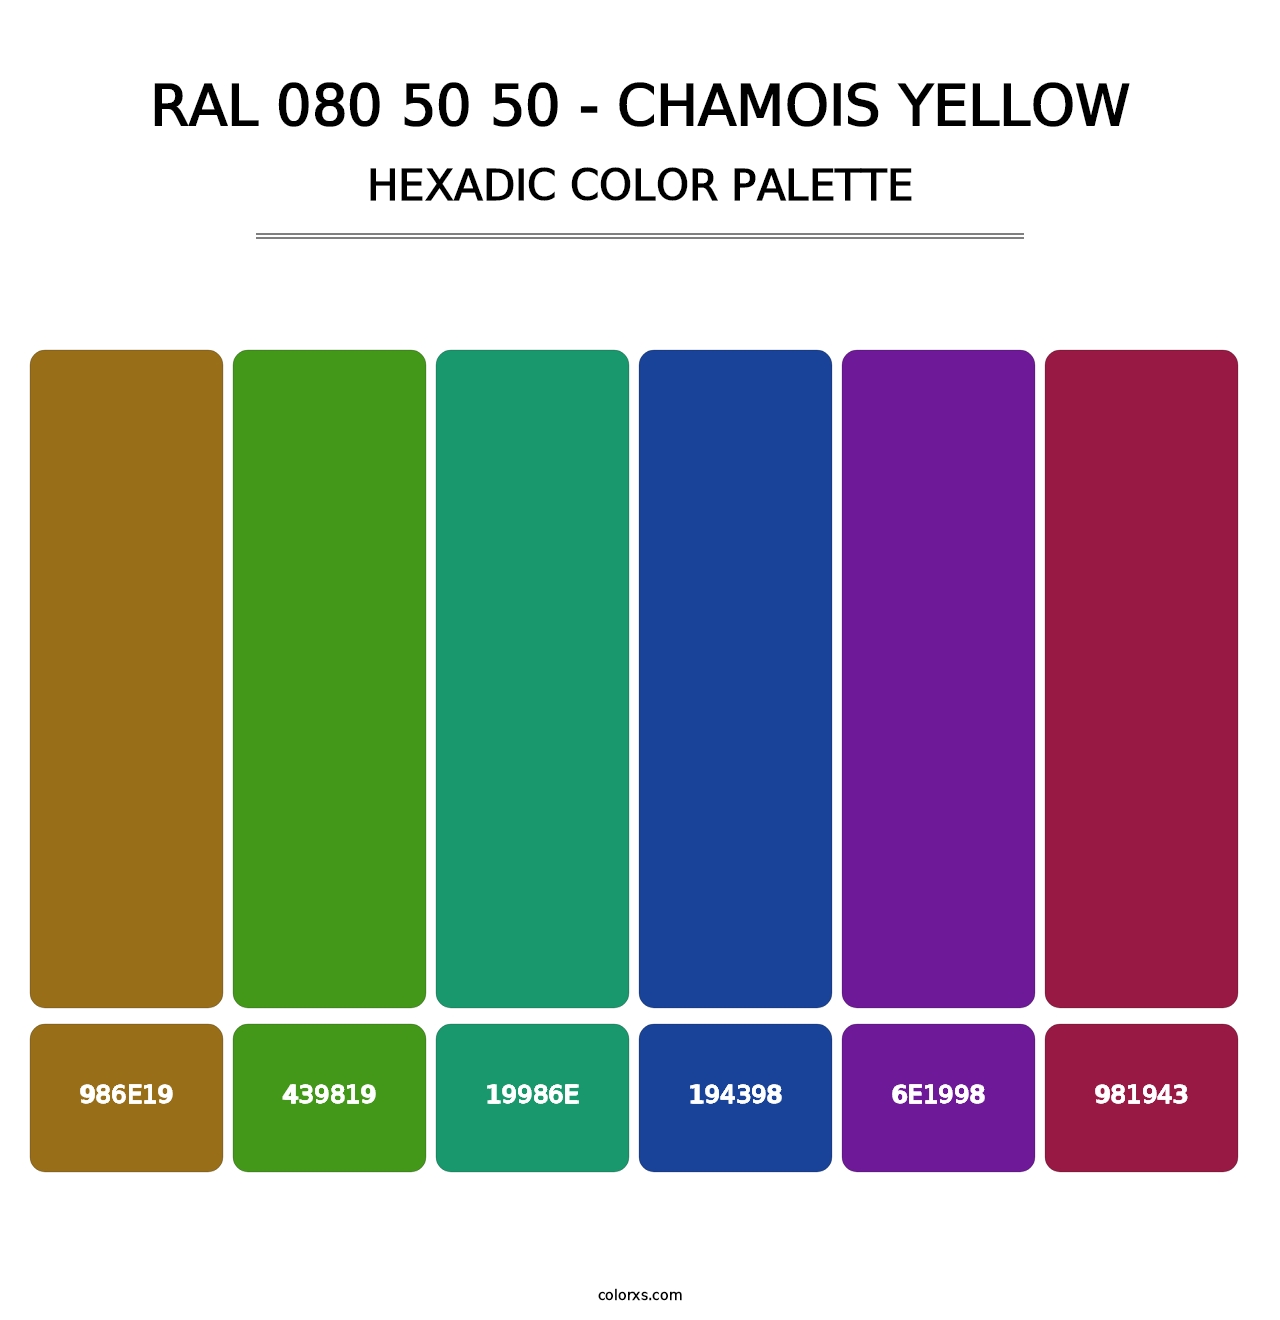 RAL 080 50 50 - Chamois Yellow - Hexadic Color Palette